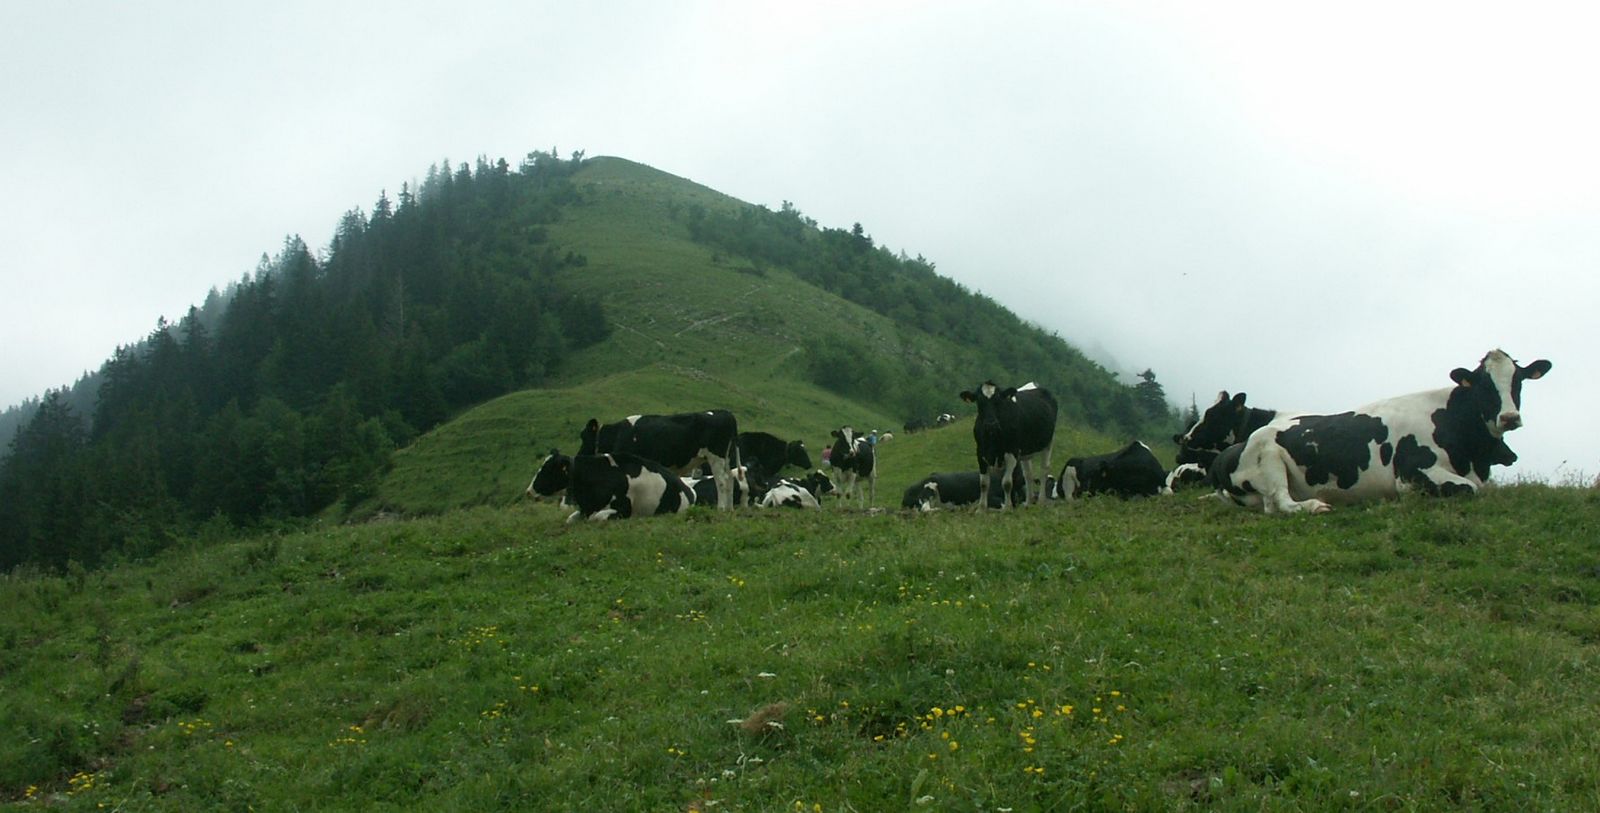 cows standing and sitting on the grass below a hill